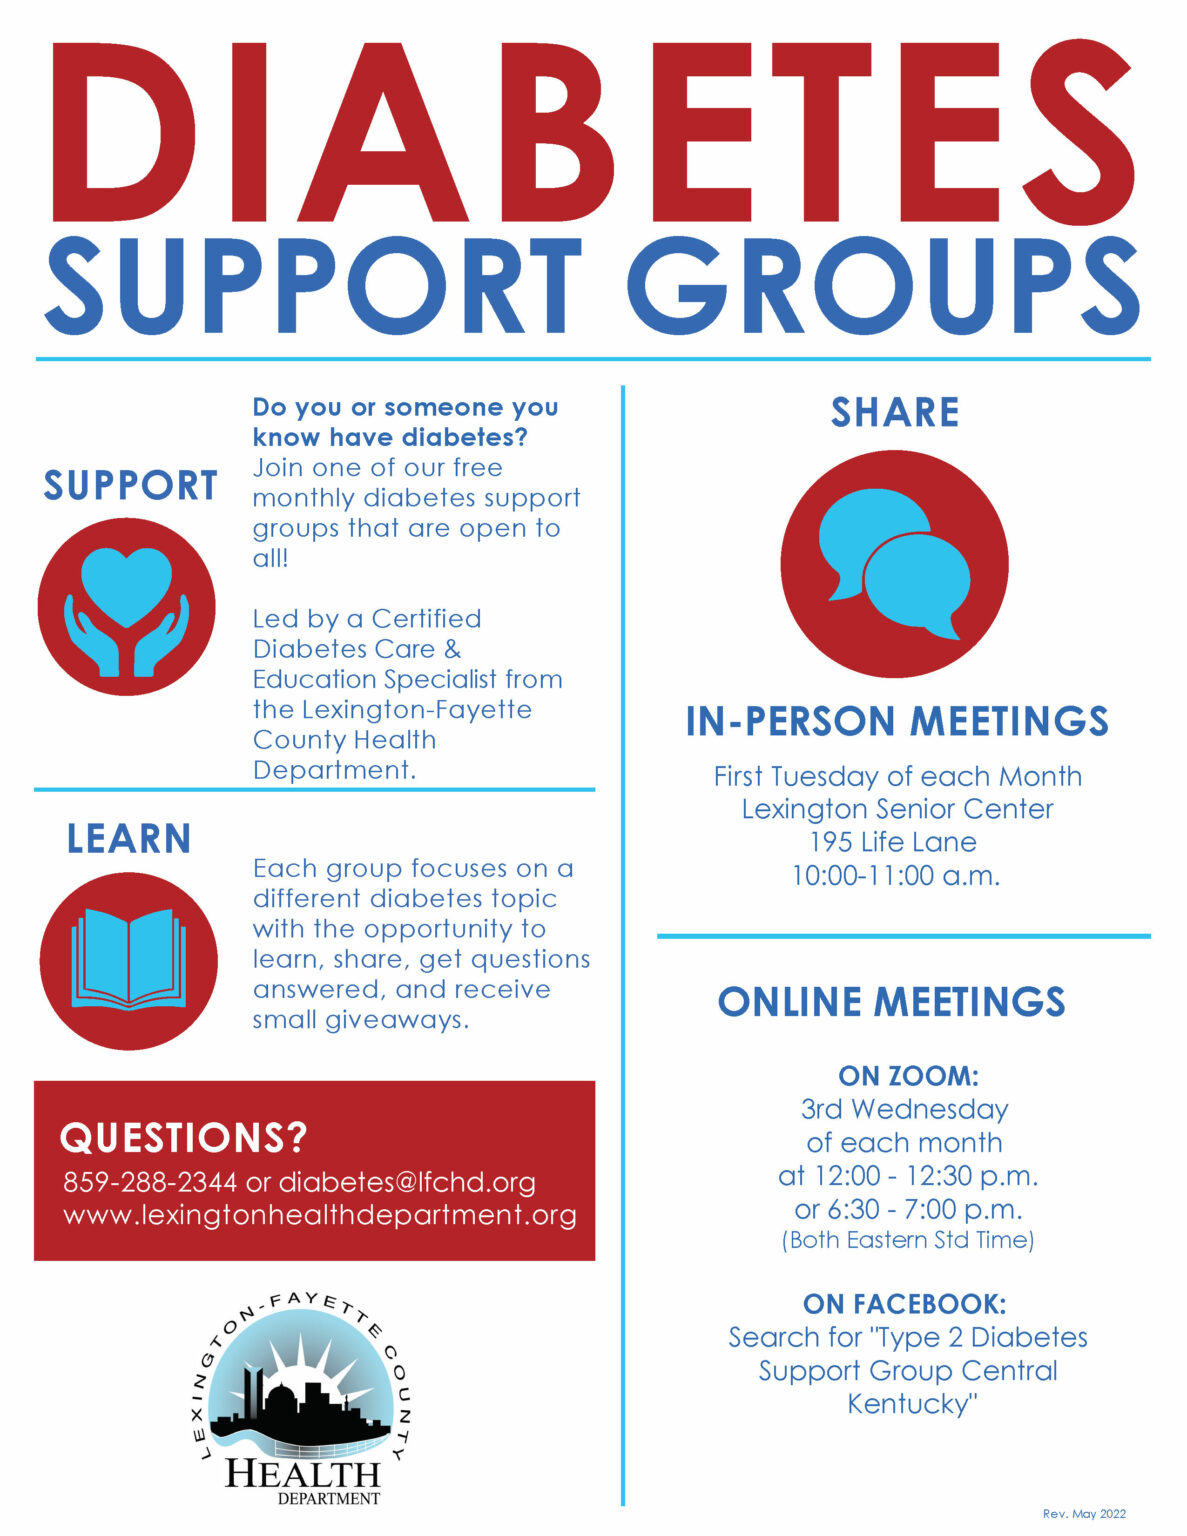 research on diabetes support groups